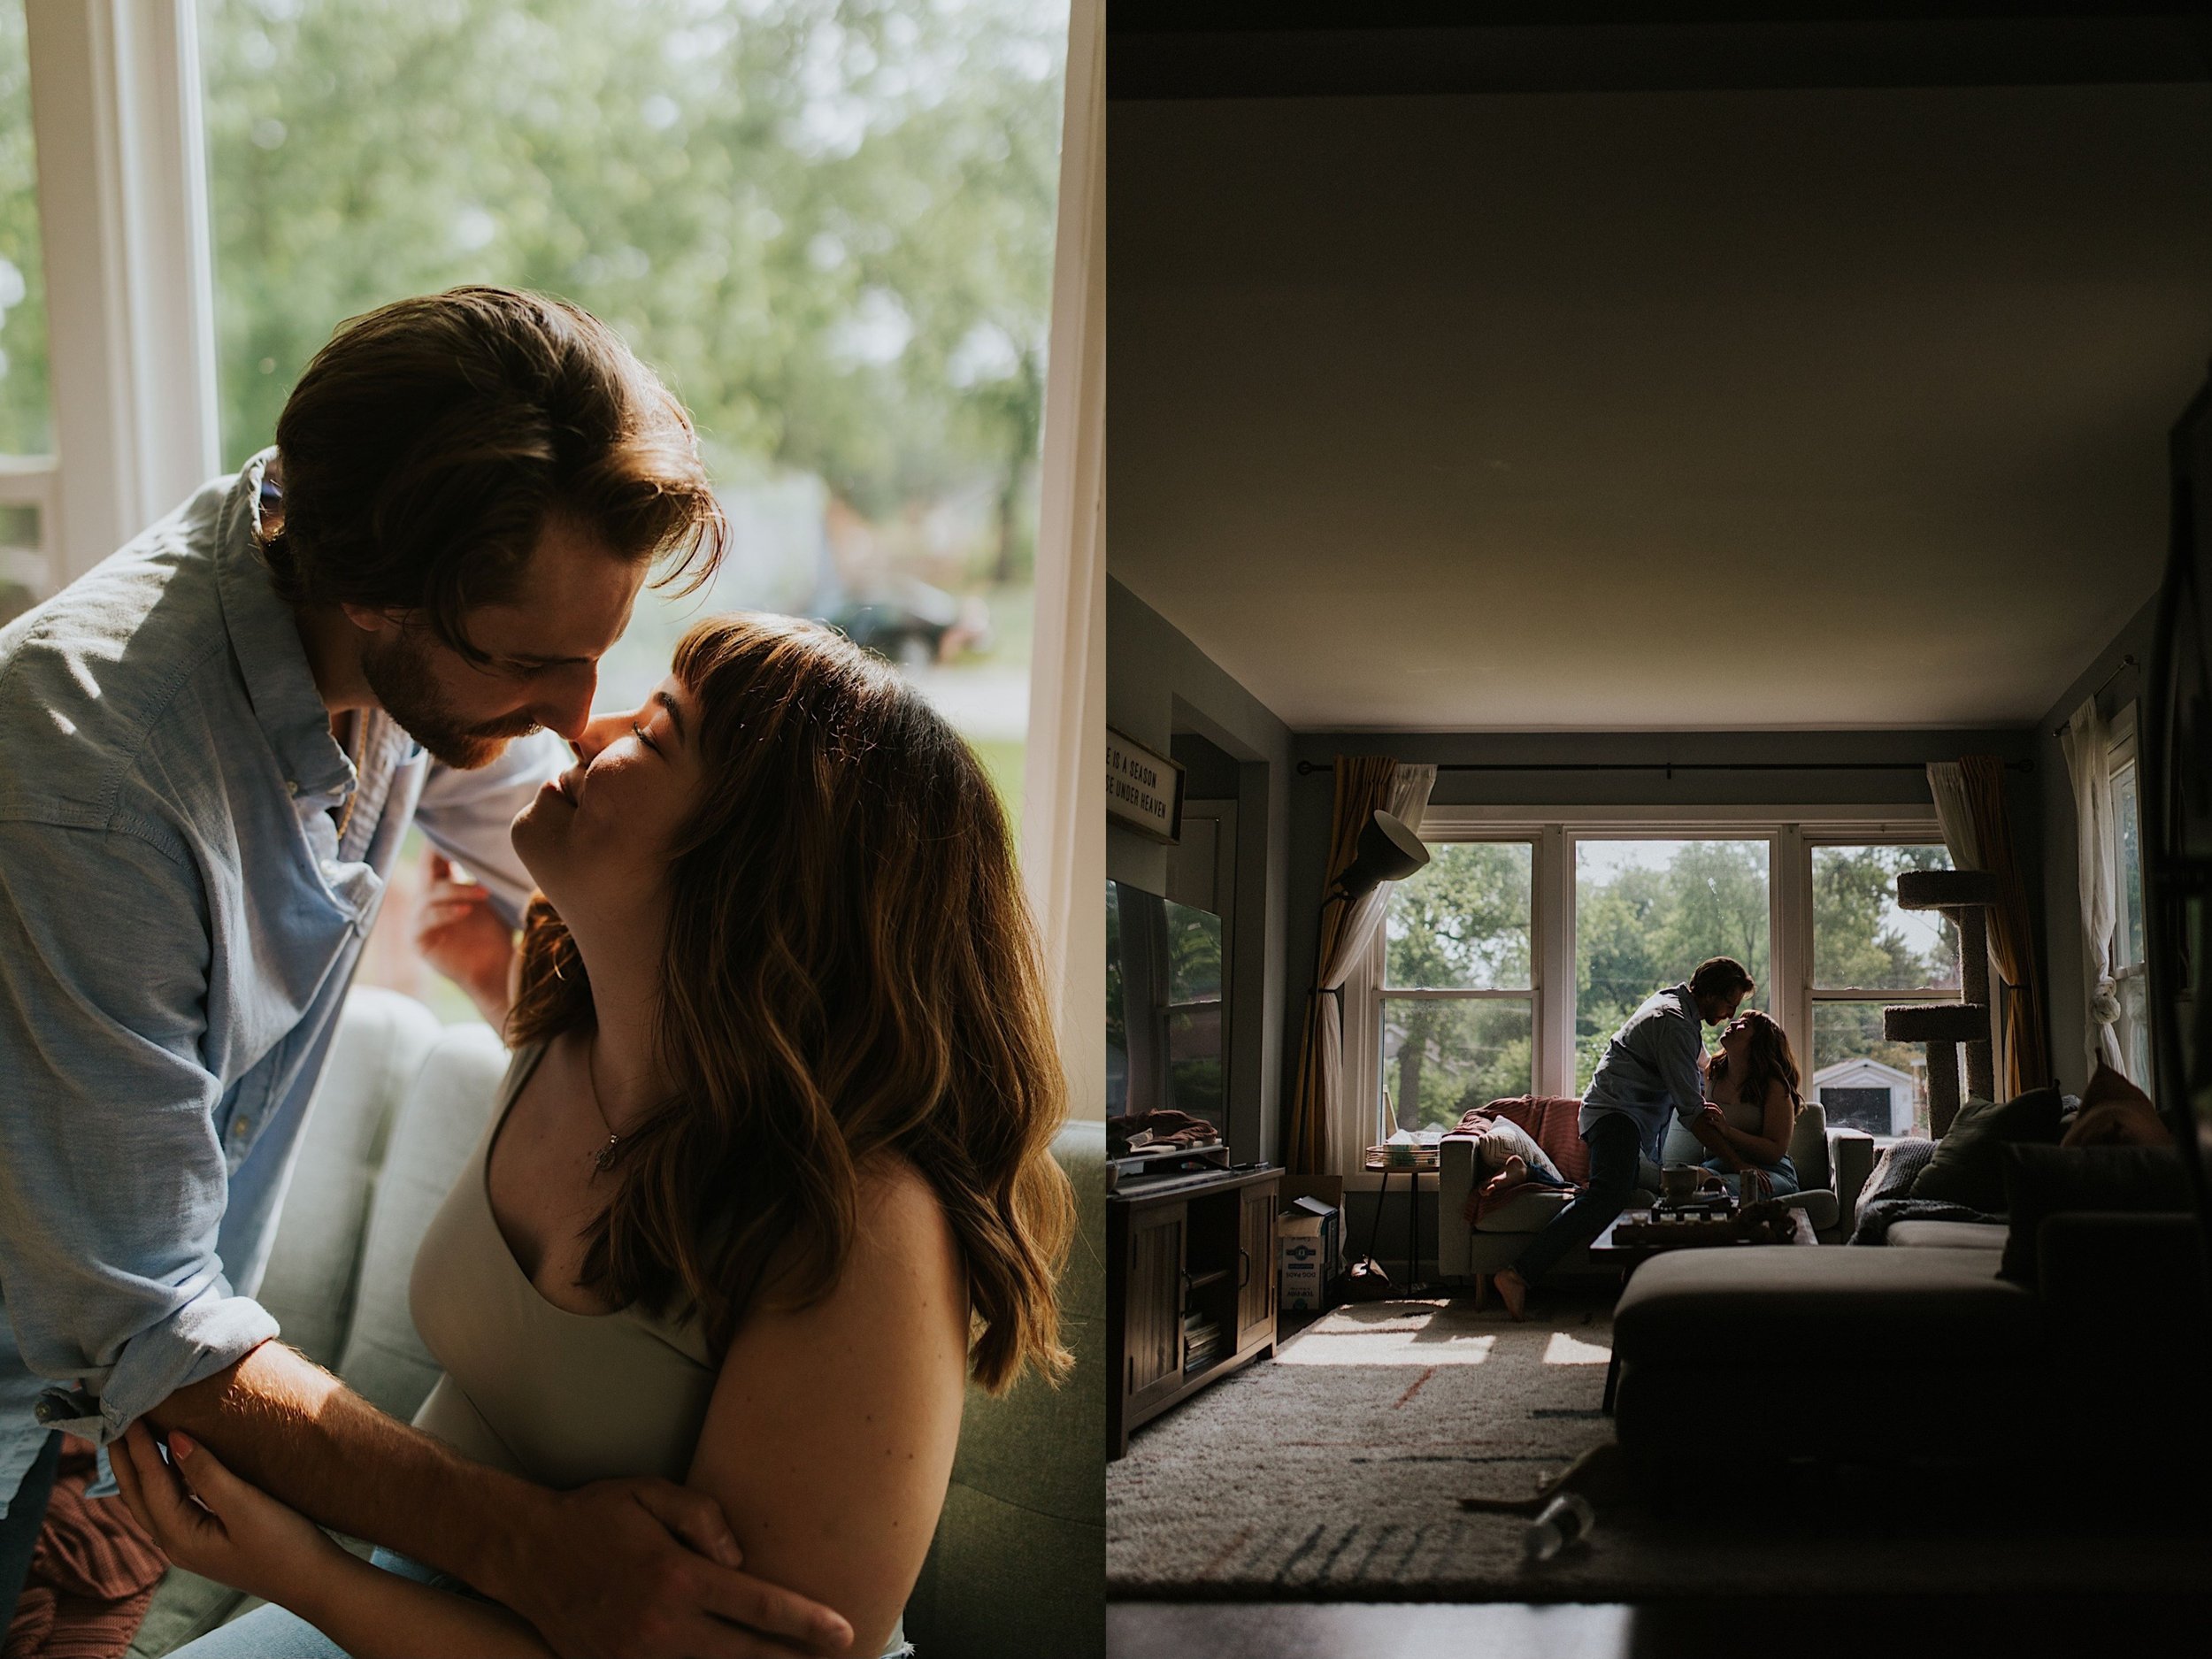 Left image is a close up image of a couple almost kissing while holding each other in front of their living room window.  The right image is of a couple almost kissing in front of their living room window, you can see their entire living room as well